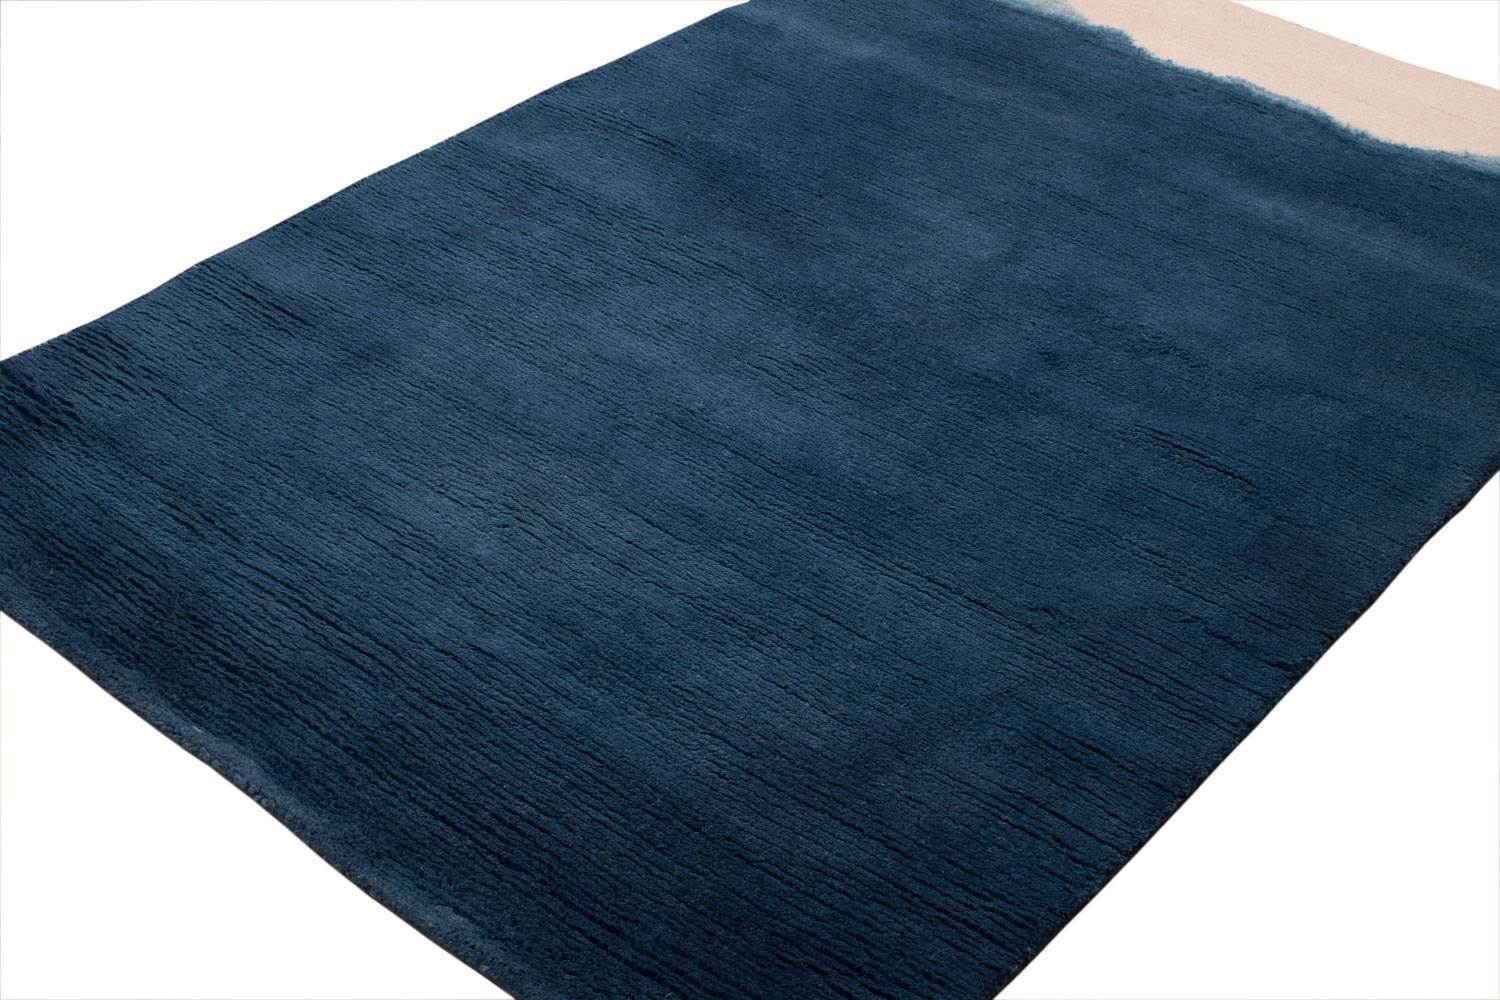 This organic rug is woven from highland wool in a shaggy high pile, and dyed with all natural indigo. This rug has fabulous depth and range through its color which is all natural! Measures: 4' x 6'.

Joseph Carini is the owner of Joseph Carini